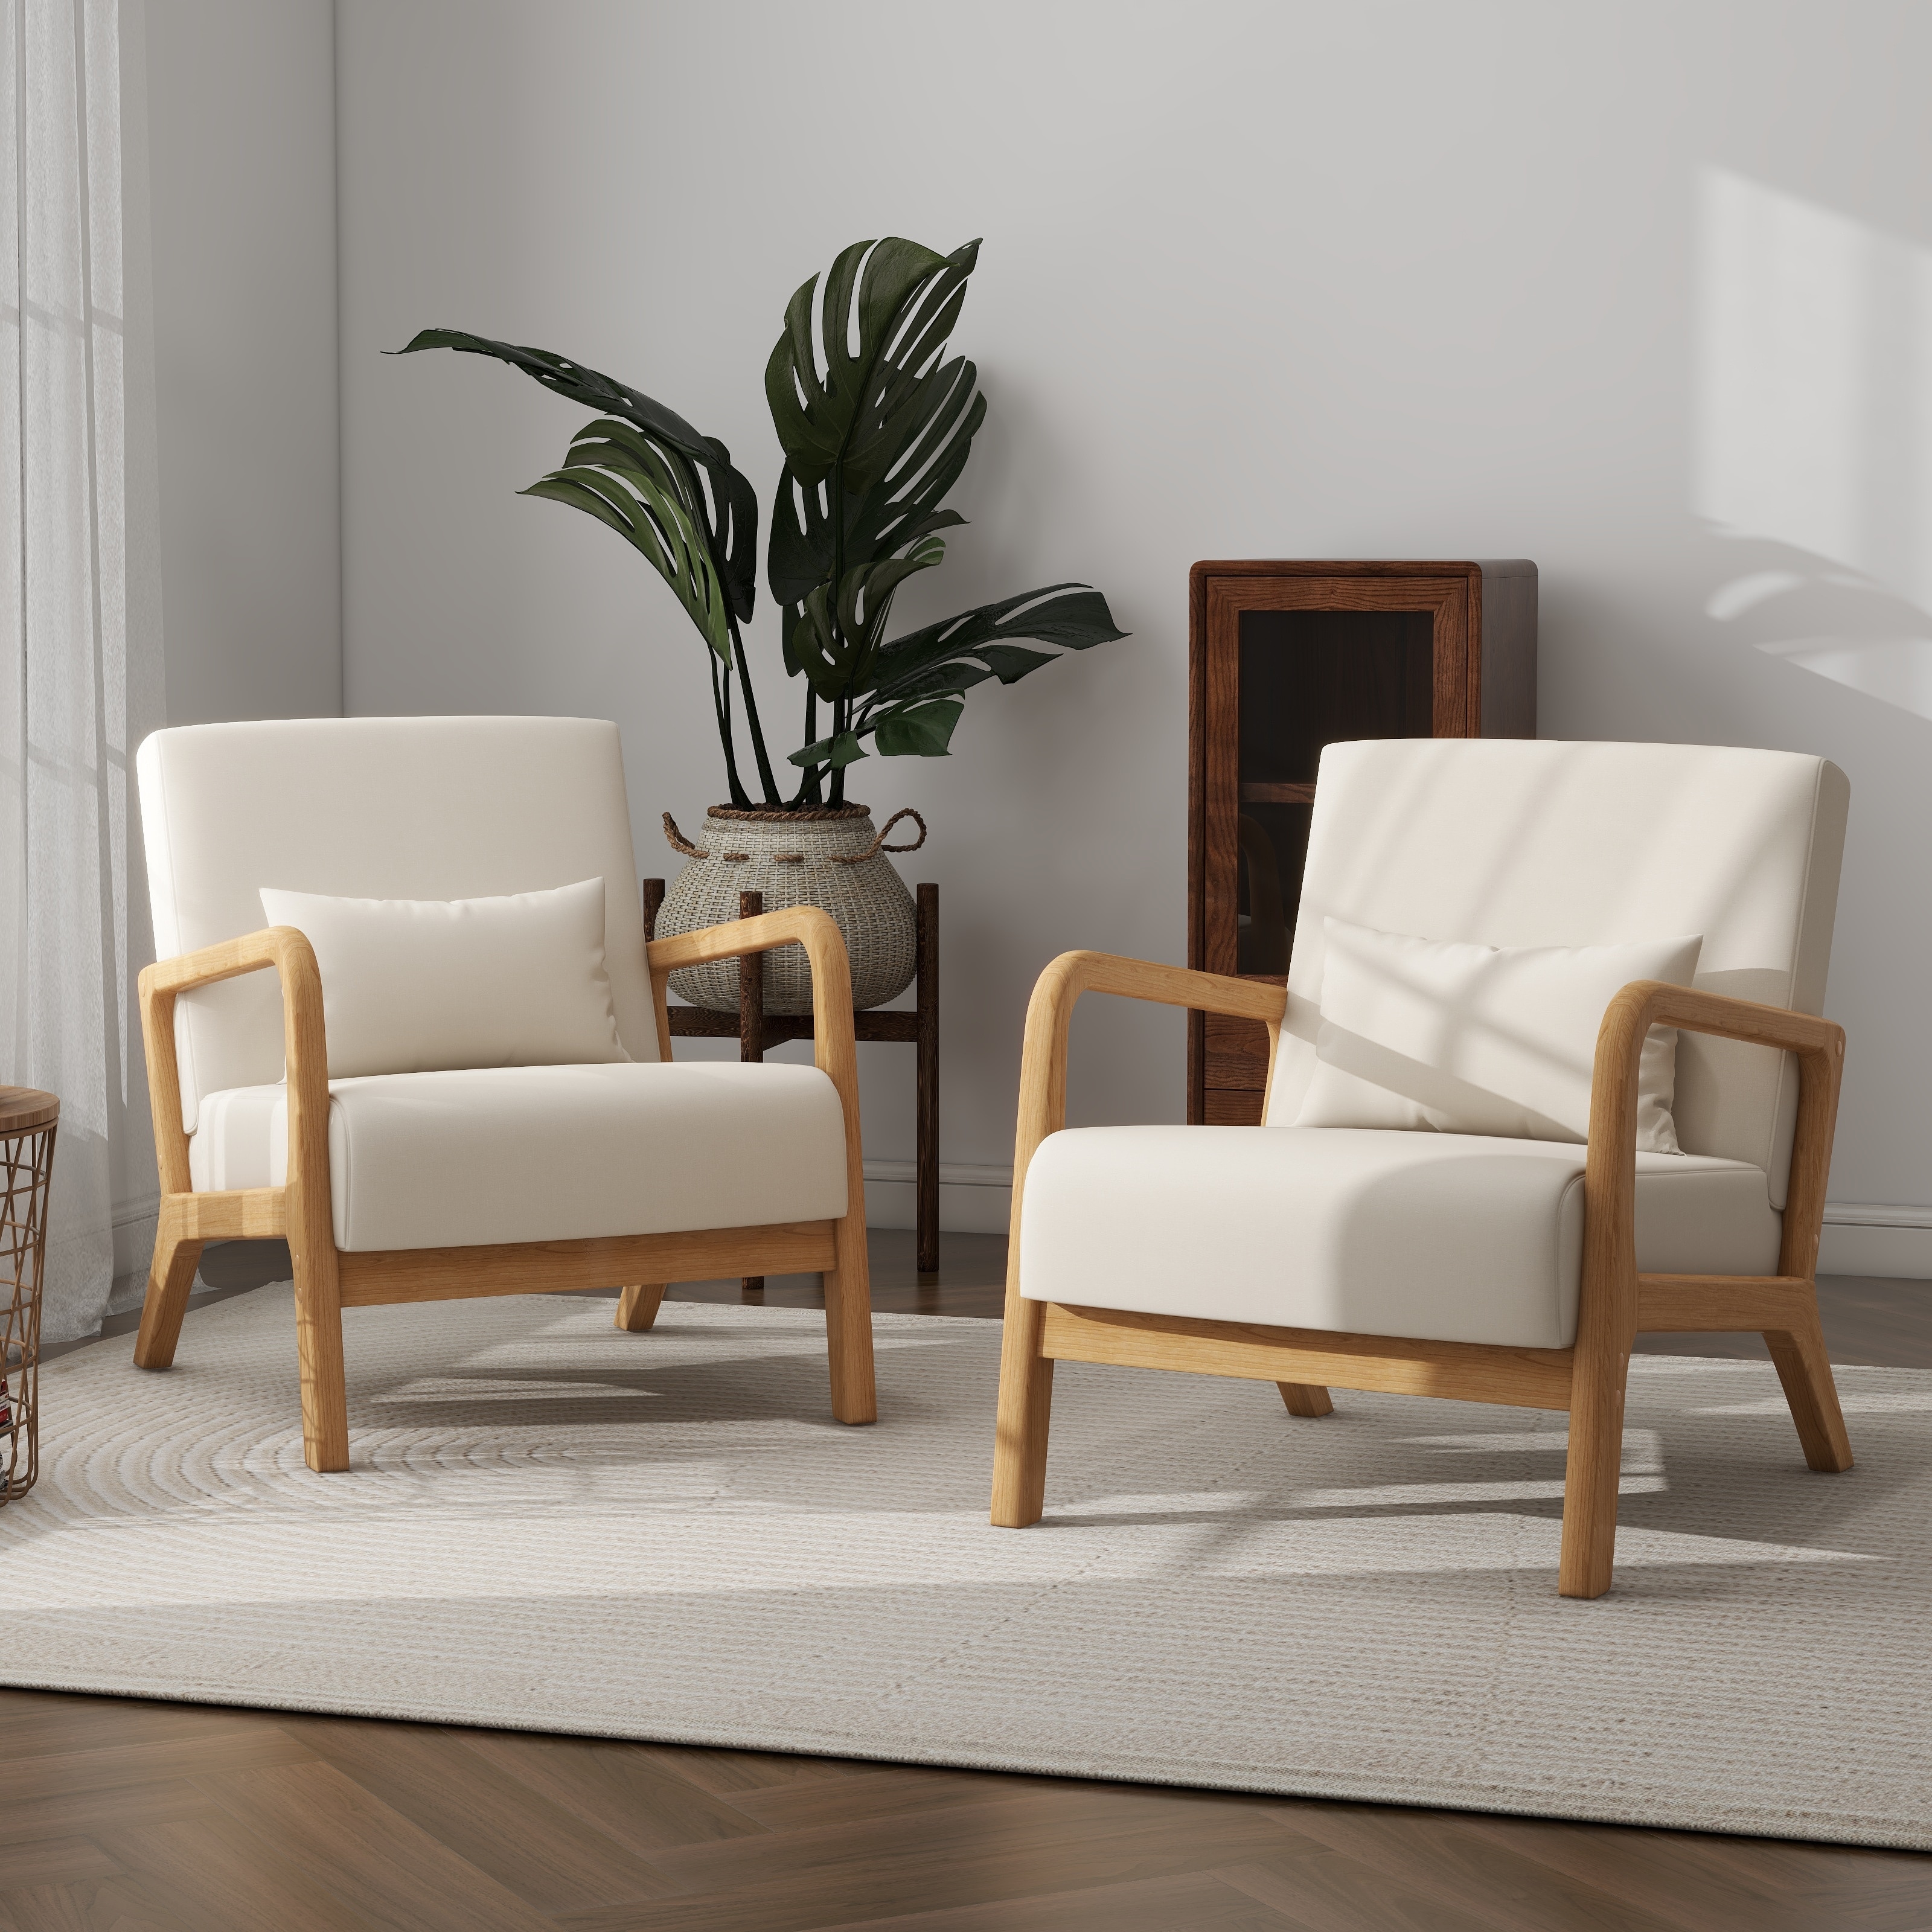 2 Set Modern Accent Chairs for Living Room